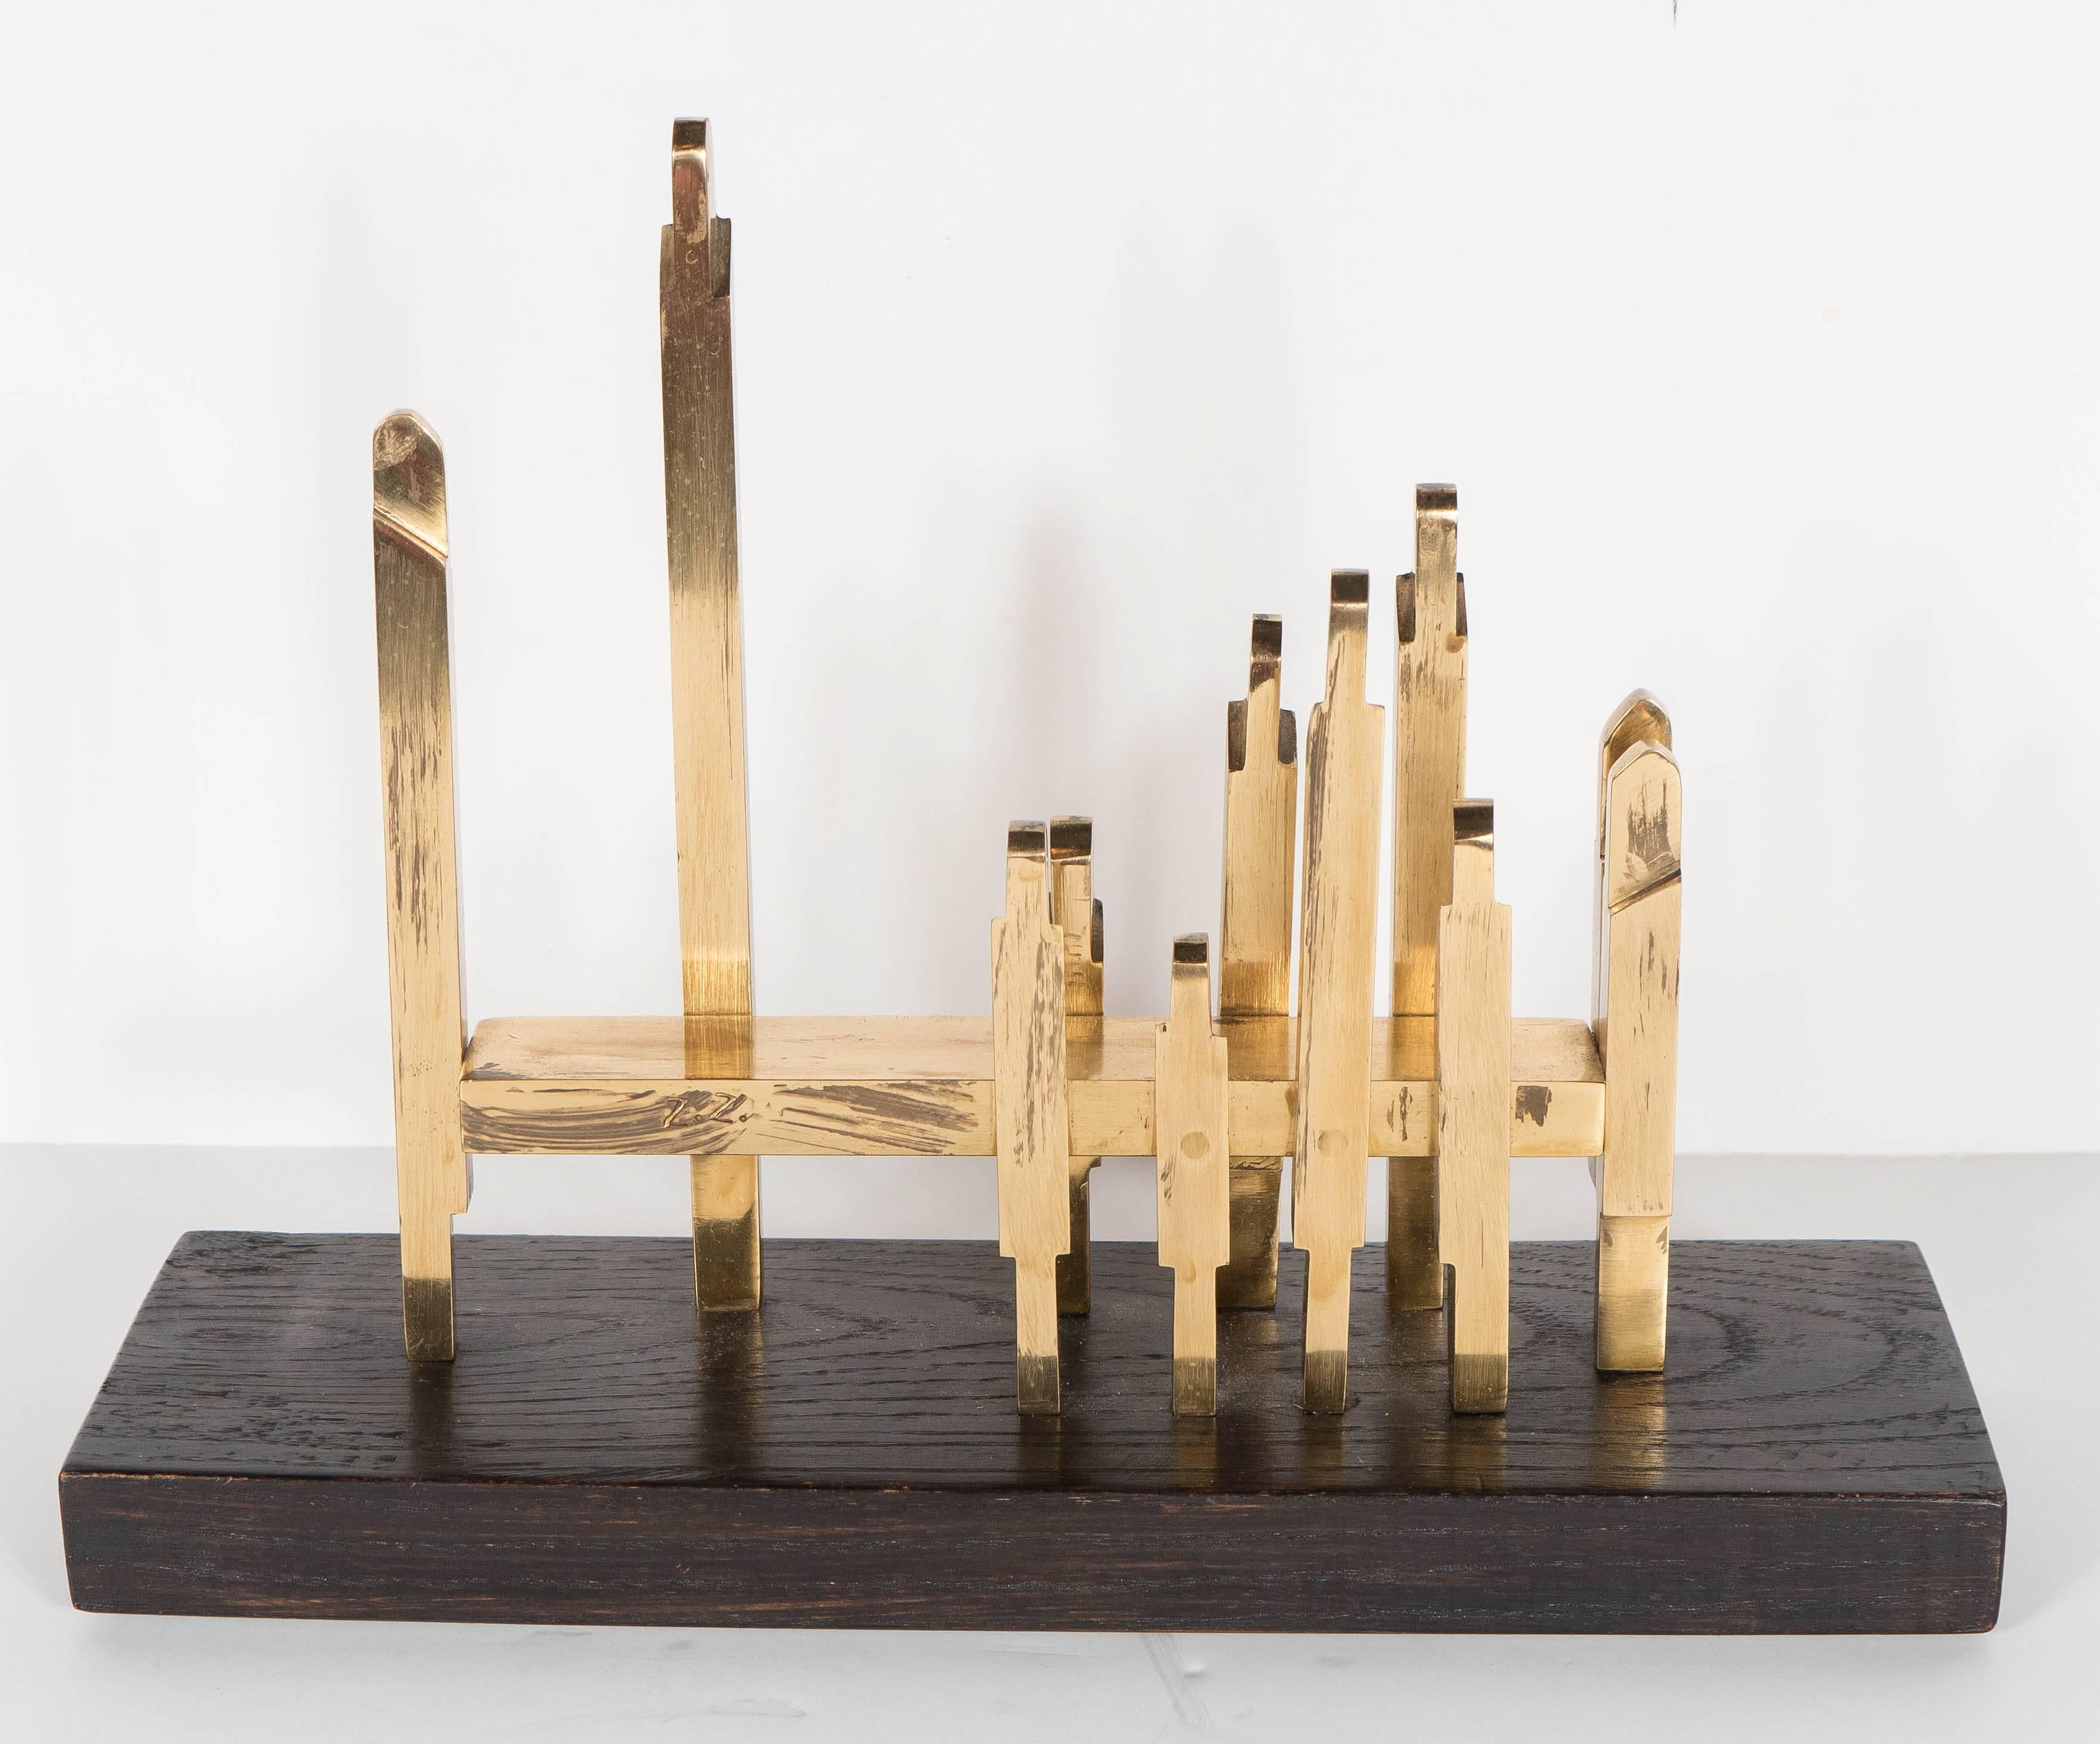 Mid-Century Modernist brass sculpture by Croatian artist Zlatic Zlatic. This example, named 